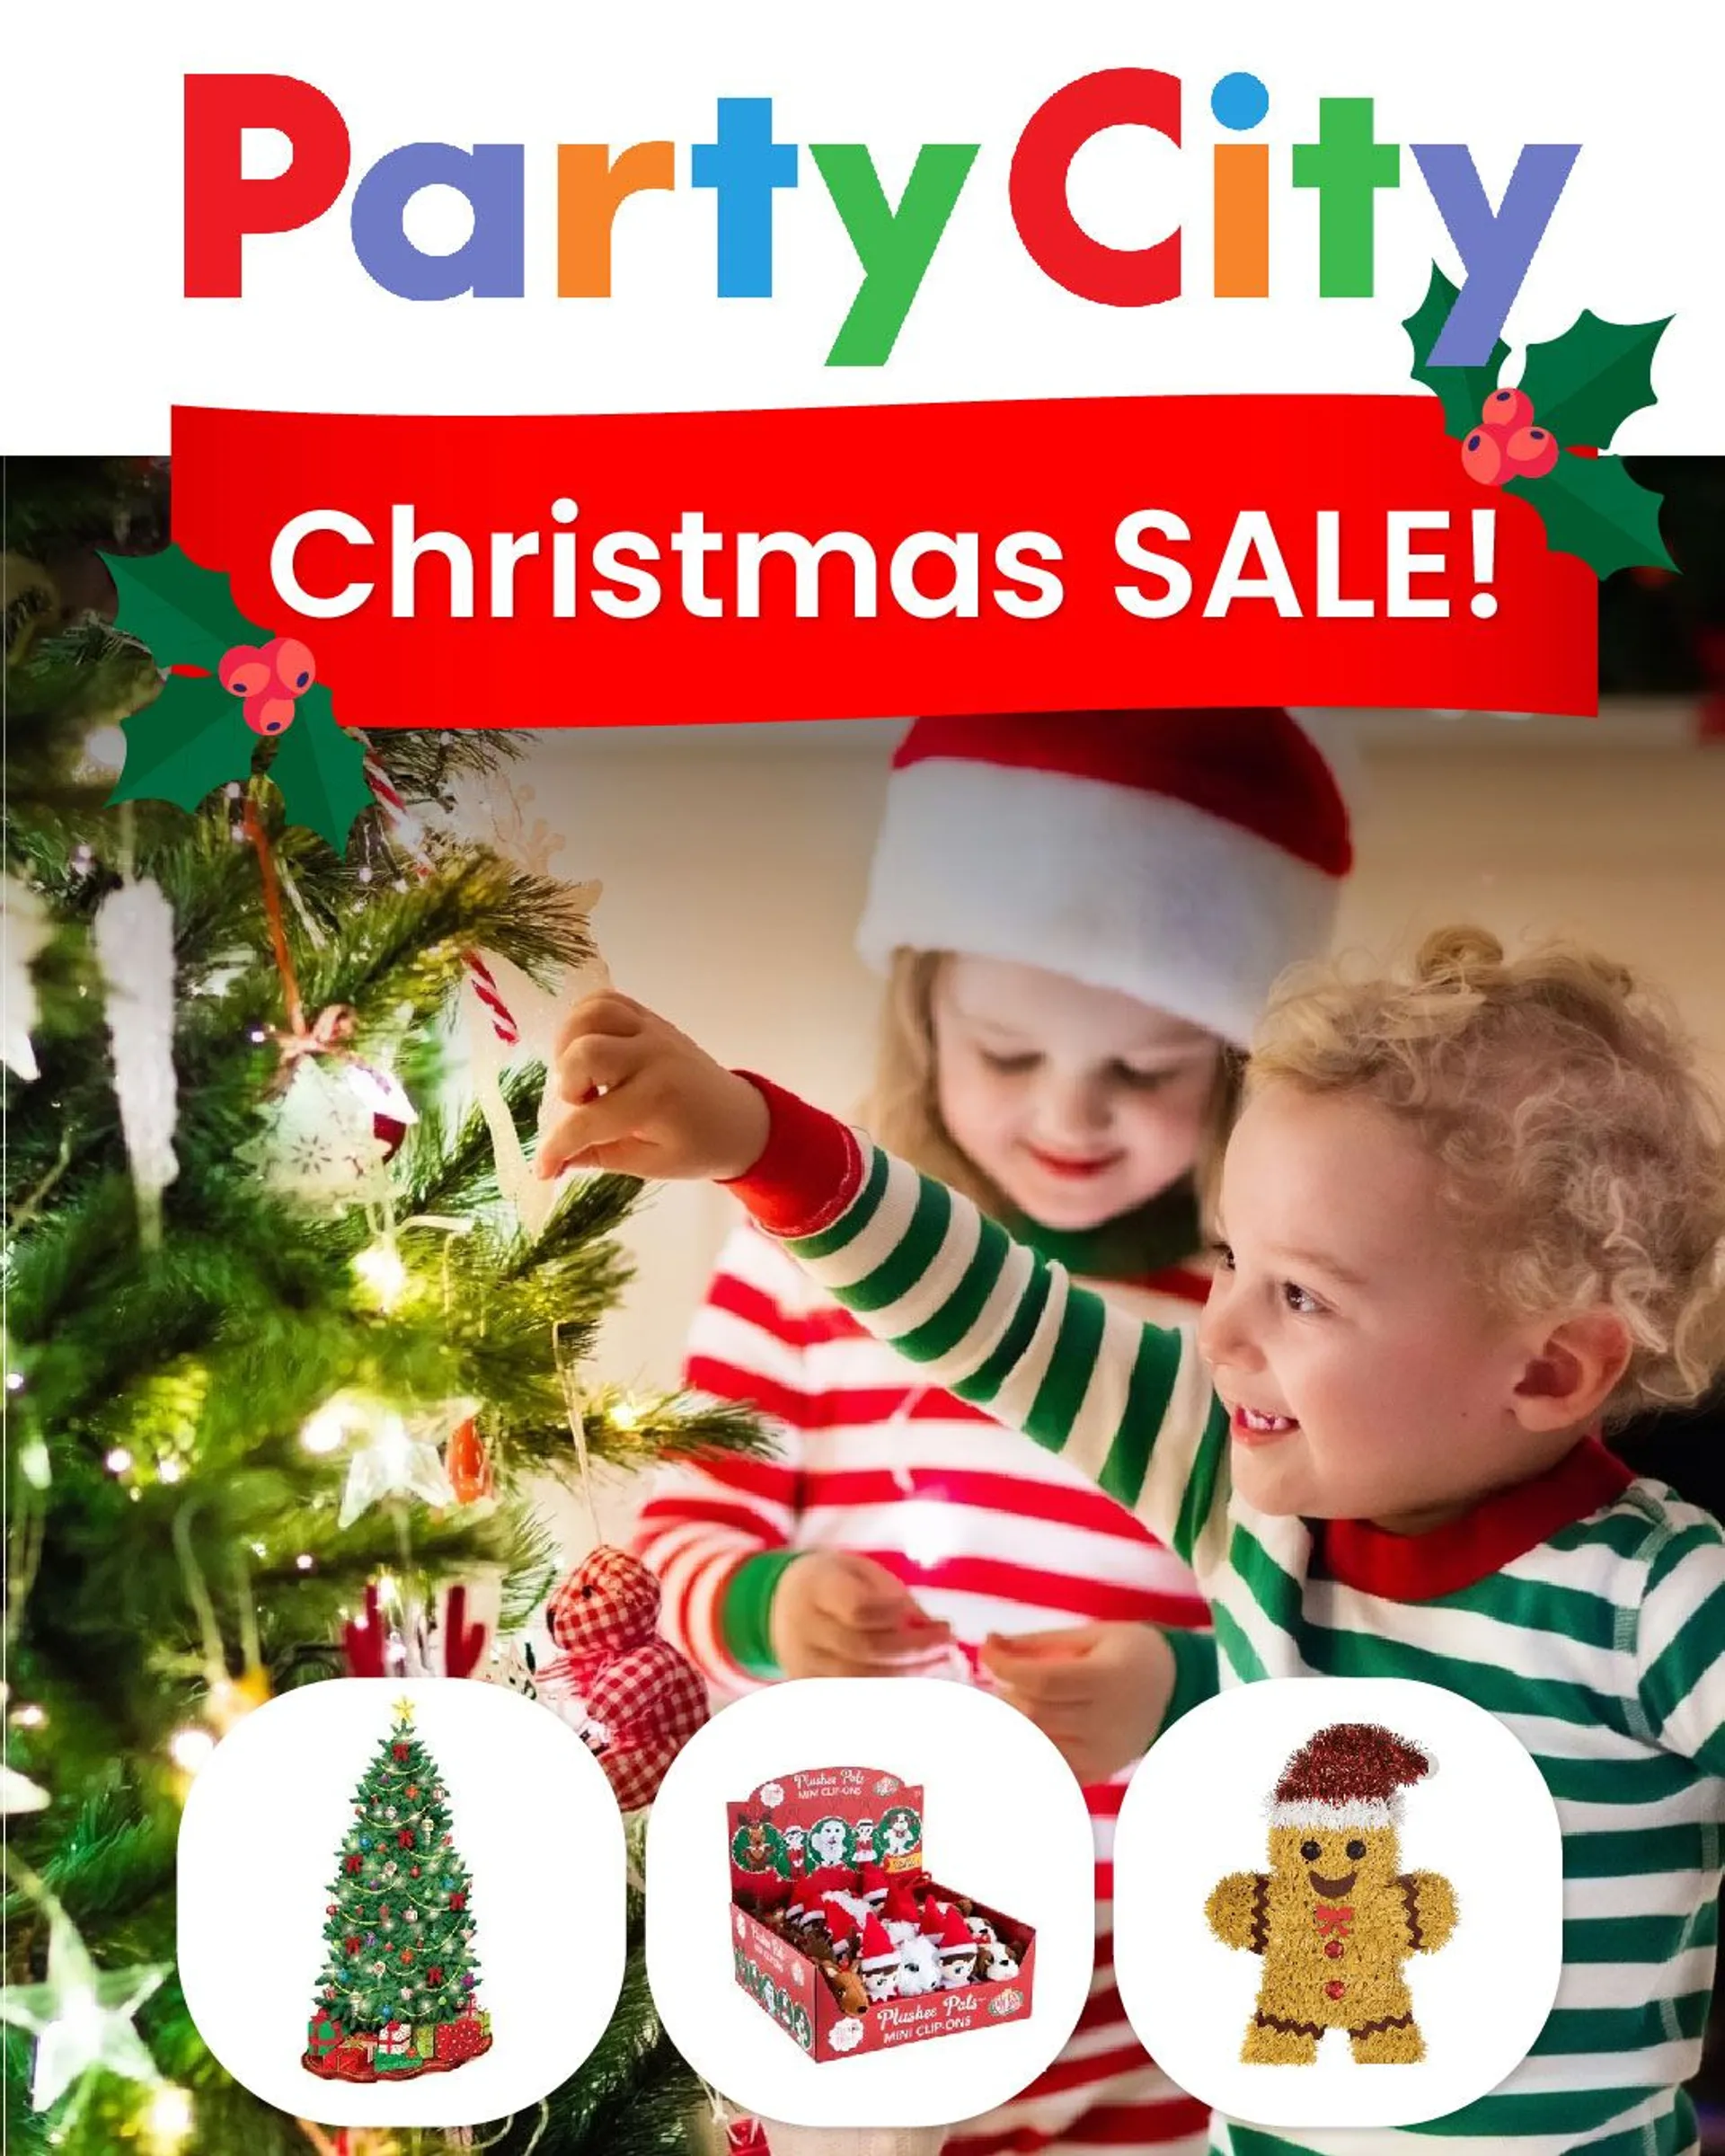 Party City - Christmas sale